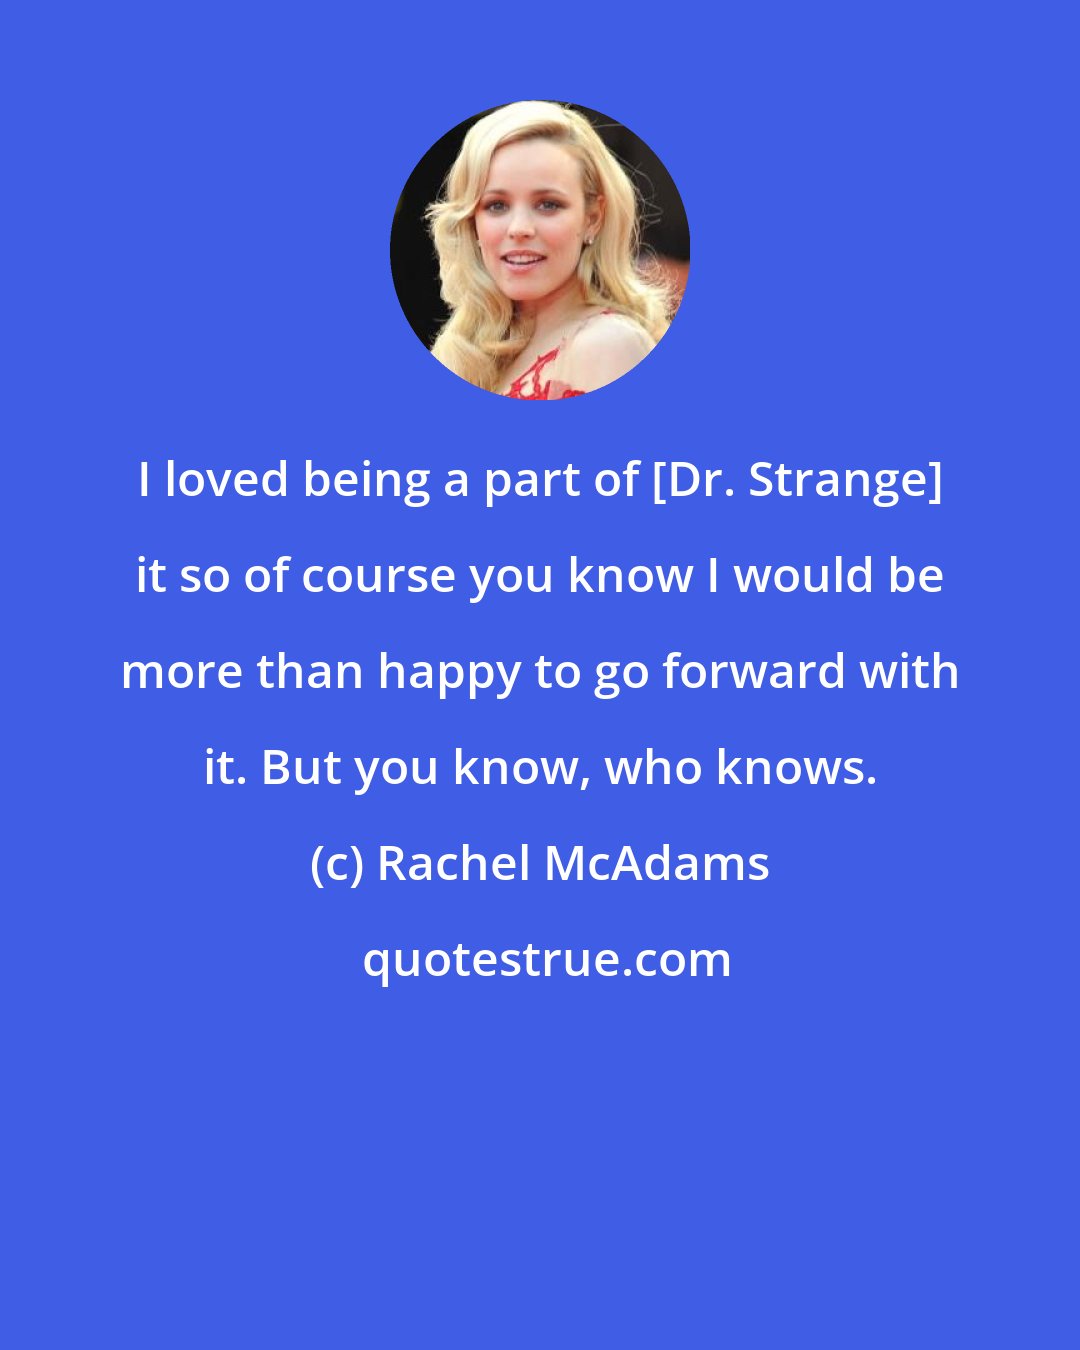 Rachel McAdams: I loved being a part of [Dr. Strange] it so of course you know I would be more than happy to go forward with it. But you know, who knows.